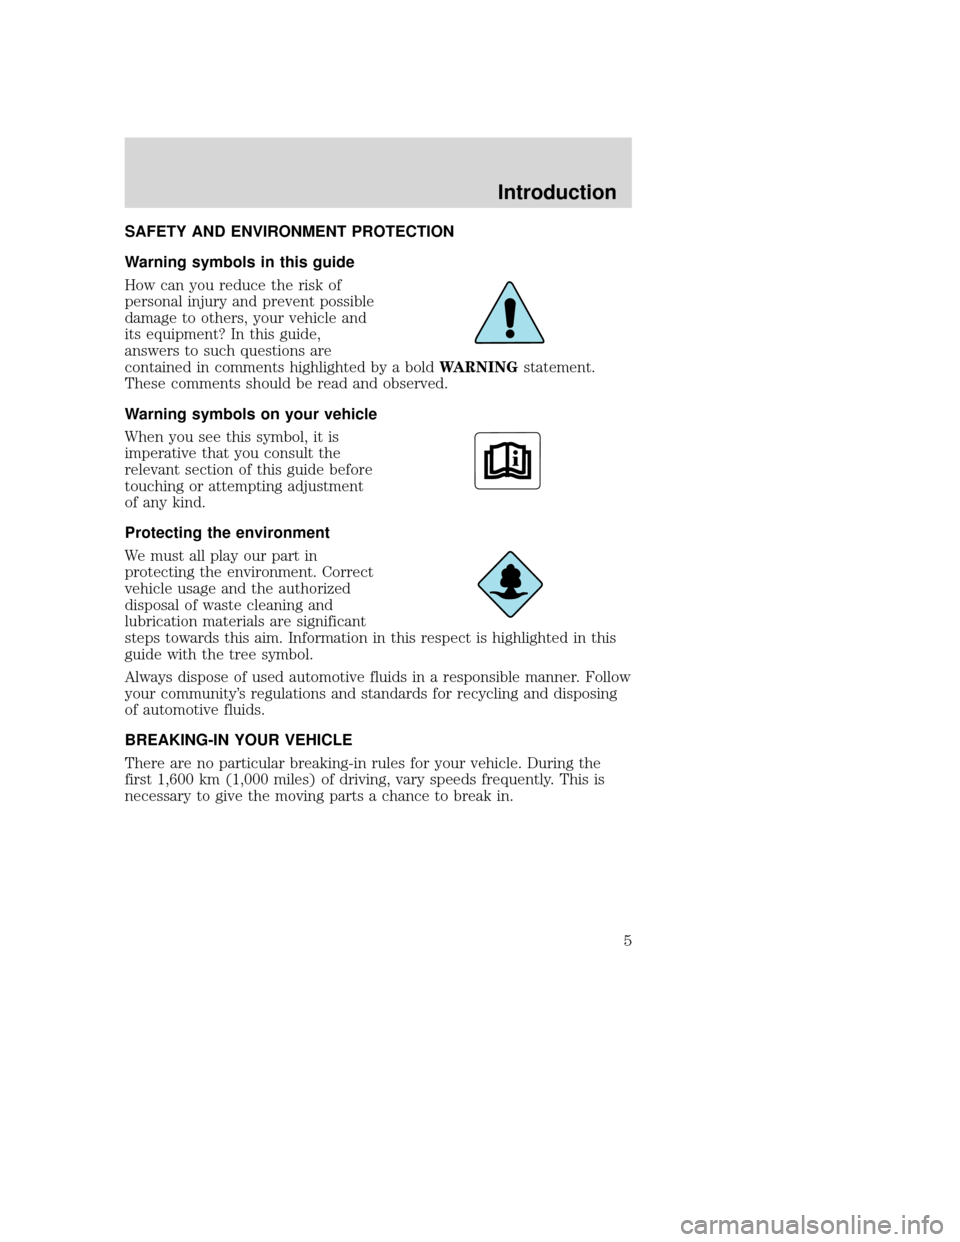 MAZDA MODEL B-SERIES 2004  Owners Manual (in English) SAFETY AND ENVIRONMENT PROTECTION
Warning symbols in this guide
How can you reduce the risk of
personal injury and prevent possible
damage to others, your vehicle and
its equipment? In this guide,
ans